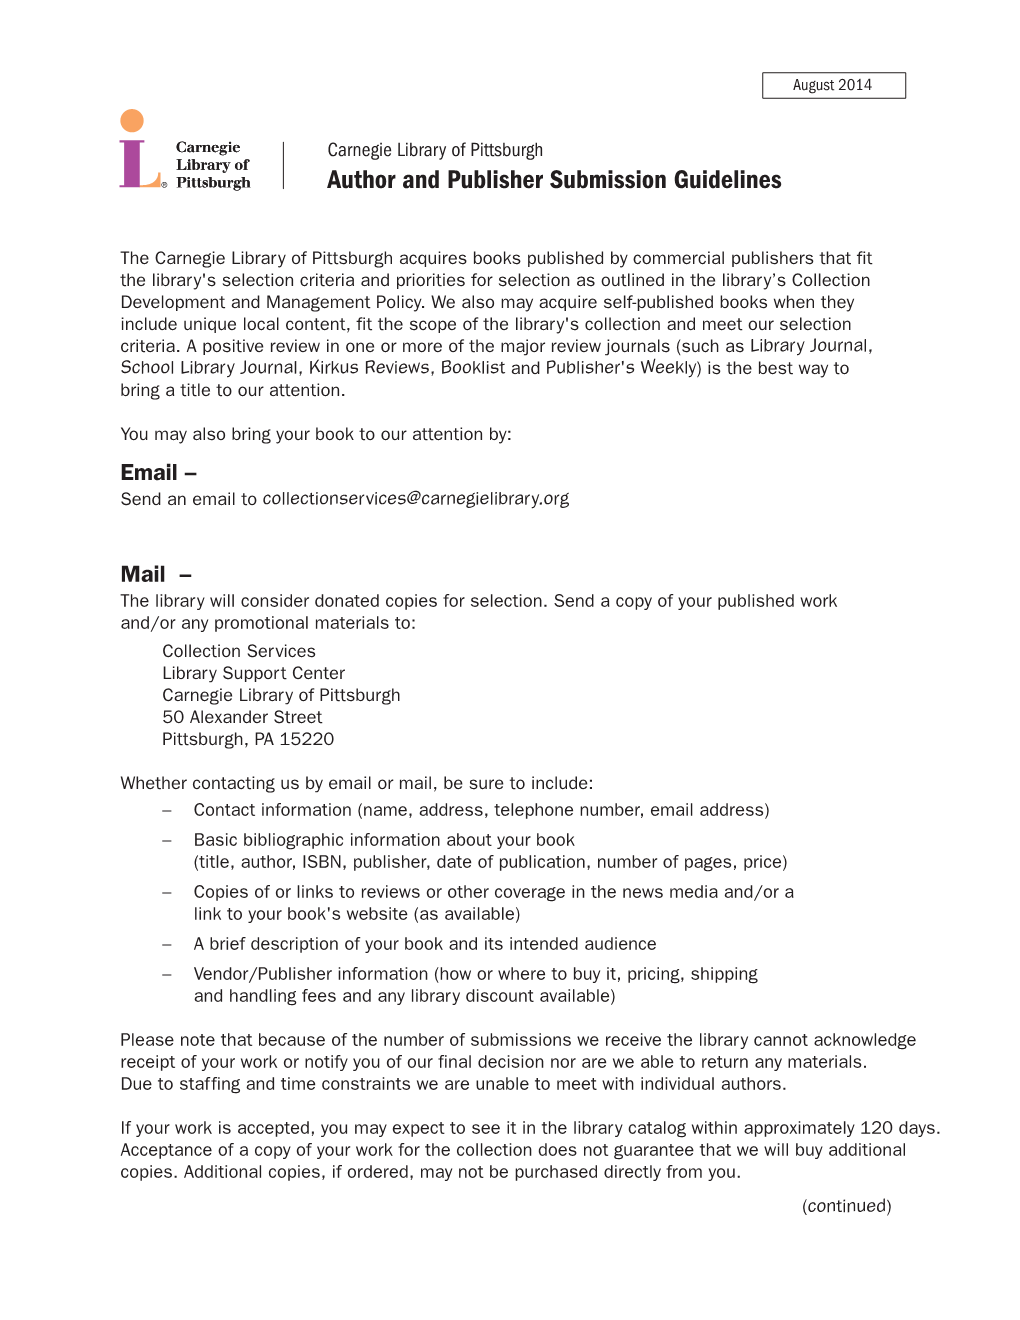 Author and Publisher Submission Guidelines